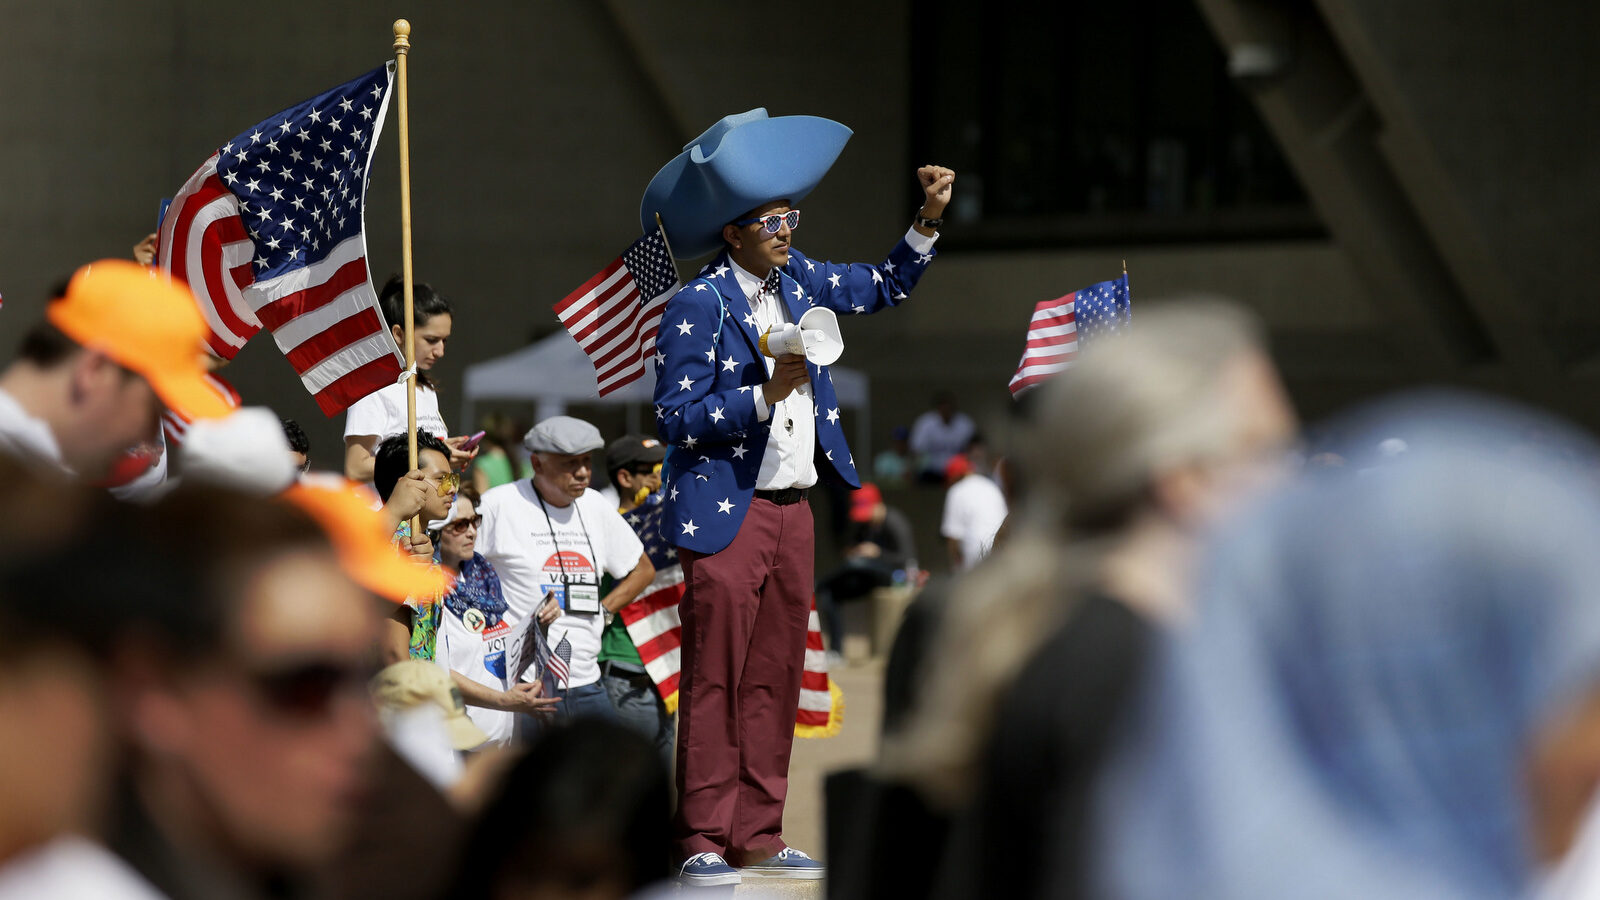 Bhavik Patel raises his fist during a protest rally in downtown Dallas, Sunday, April 9, 2017. Thousands of people are marching and rallying in downtown Dallas to call for an overhaul of the nation's immigration system and end to what organizers say is an aggressive deportation policy. (AP/LM Otero)